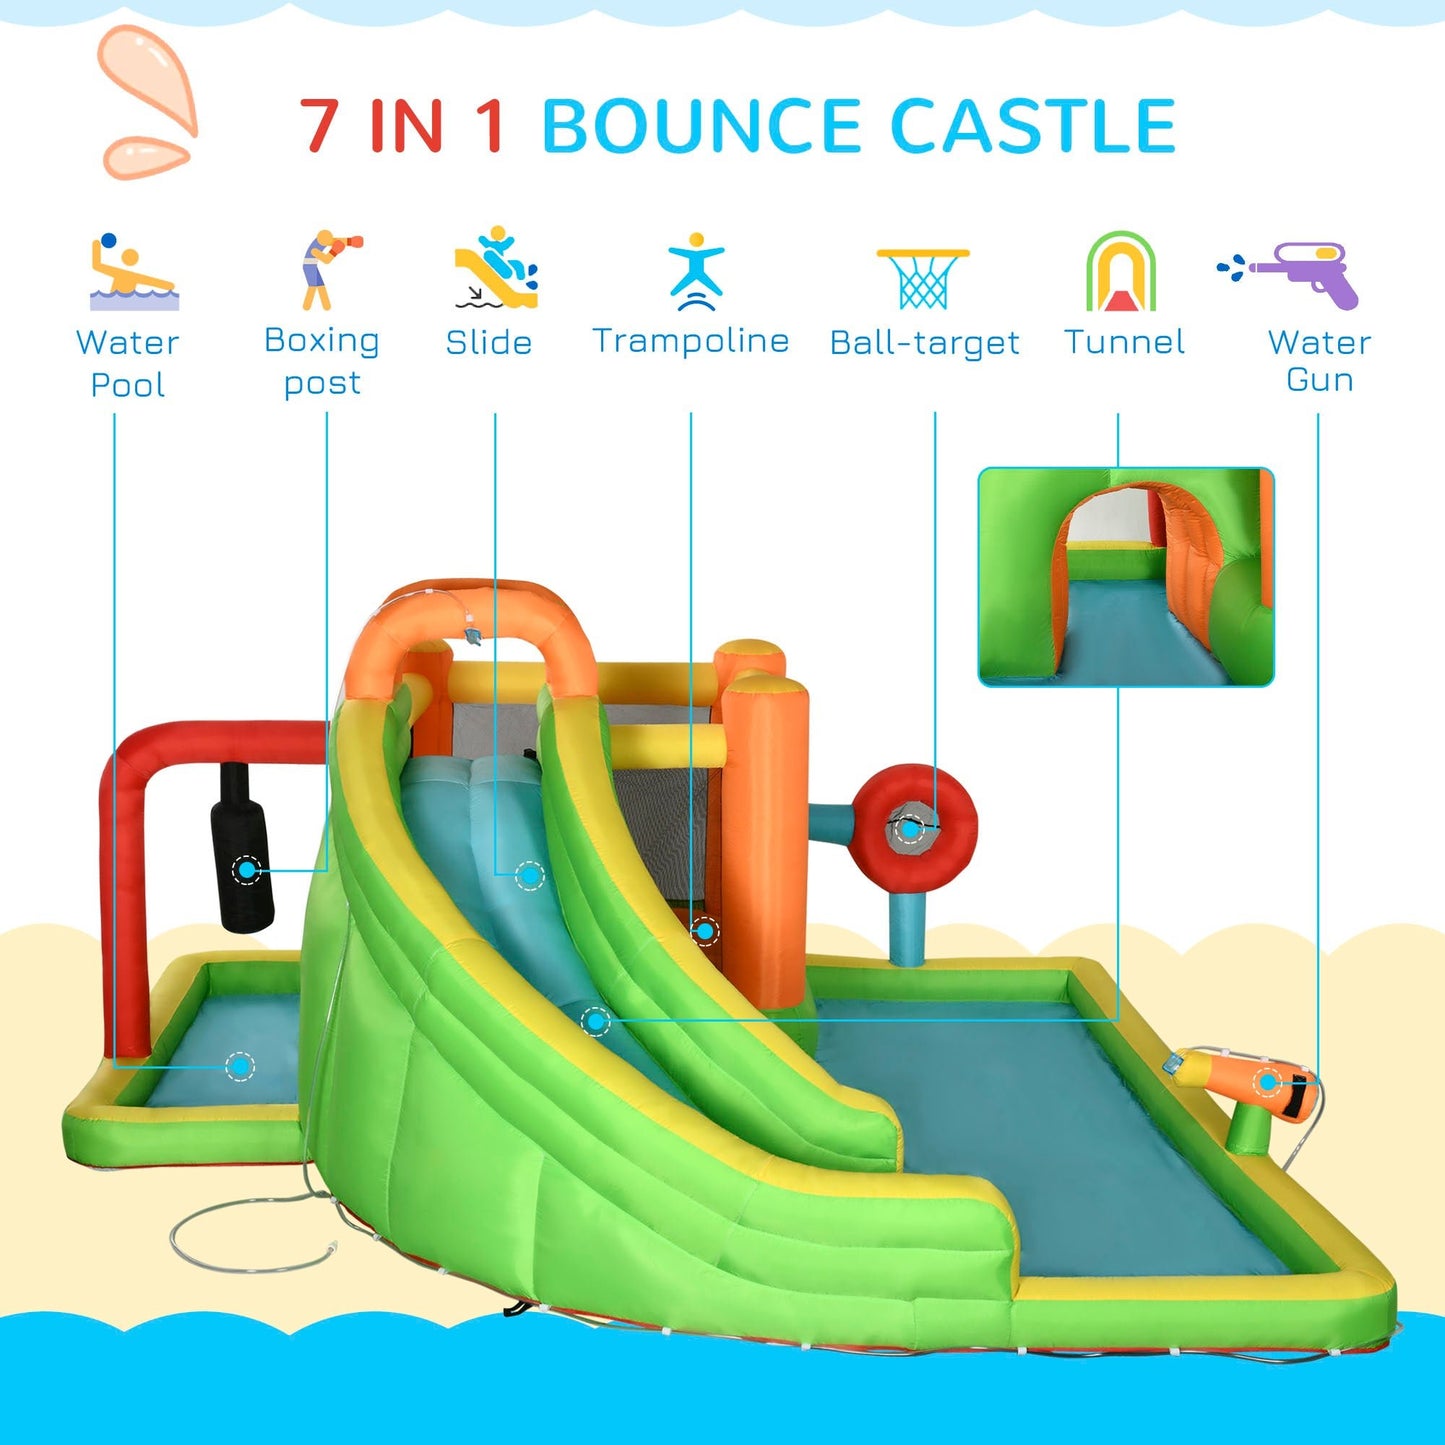 Miscellaneous-7-in-1 Inflatable Water Slide, Kids Castle Bounce House with Slide, trampoline, Pool, Ball-target, Boxing Post, Tunnel Without Air Blower - Outdoor Style Company